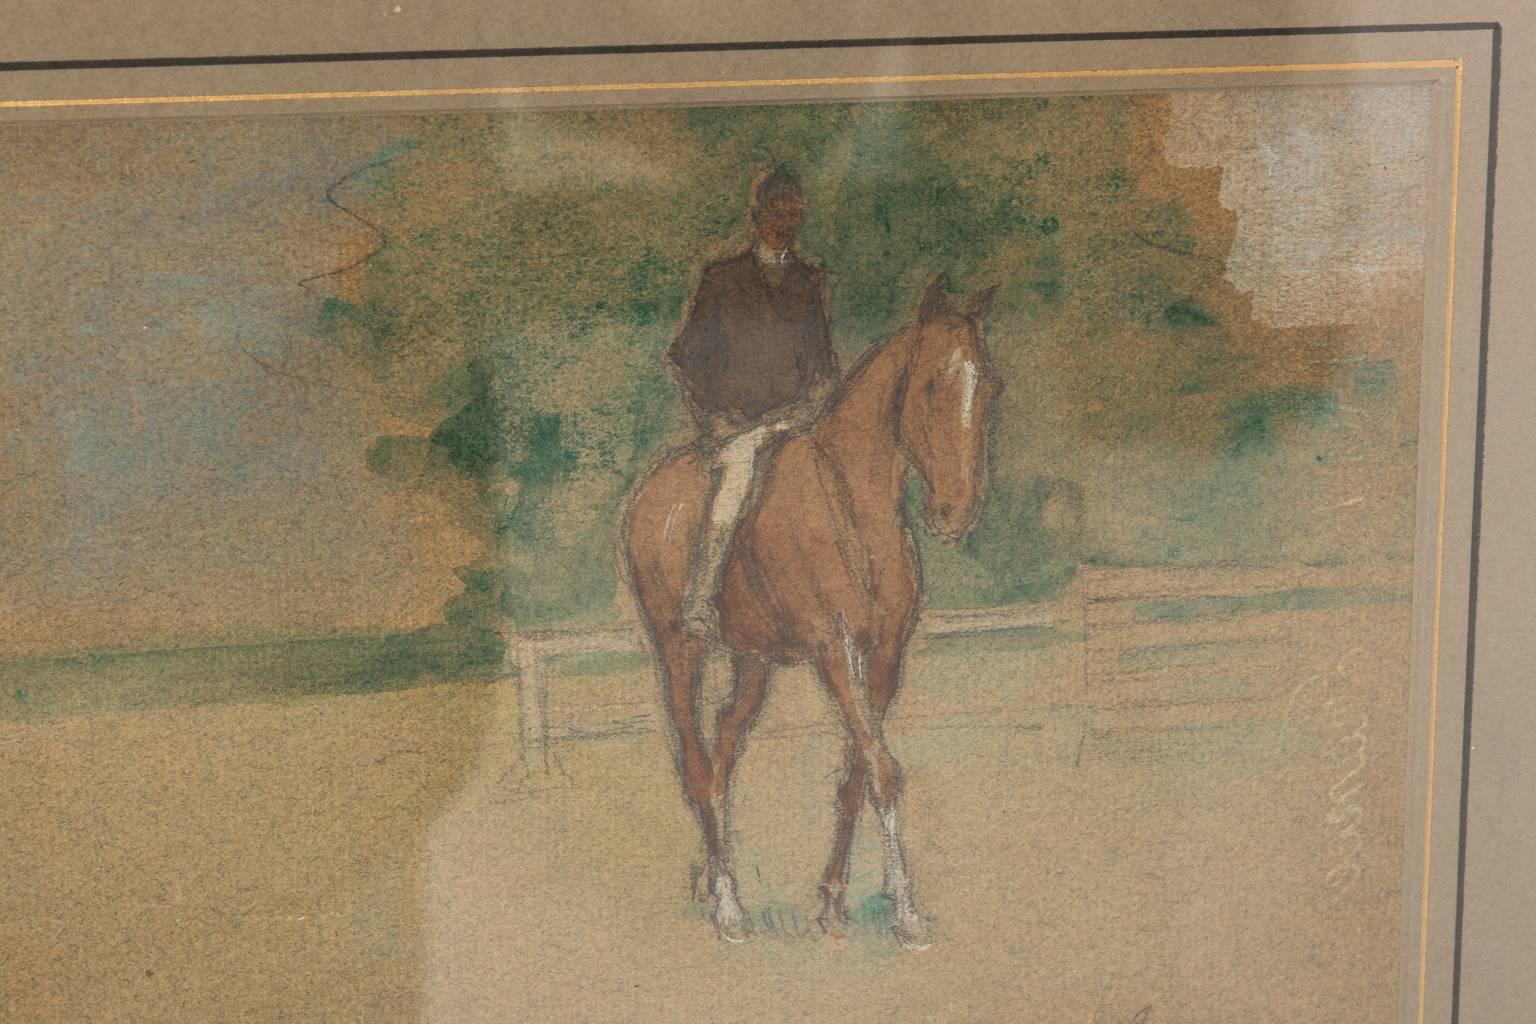 Watercolor on paper by Russian painted Boris Solotareff depicting a horse and rider in a custom matted frame, circa early 20th century.
 